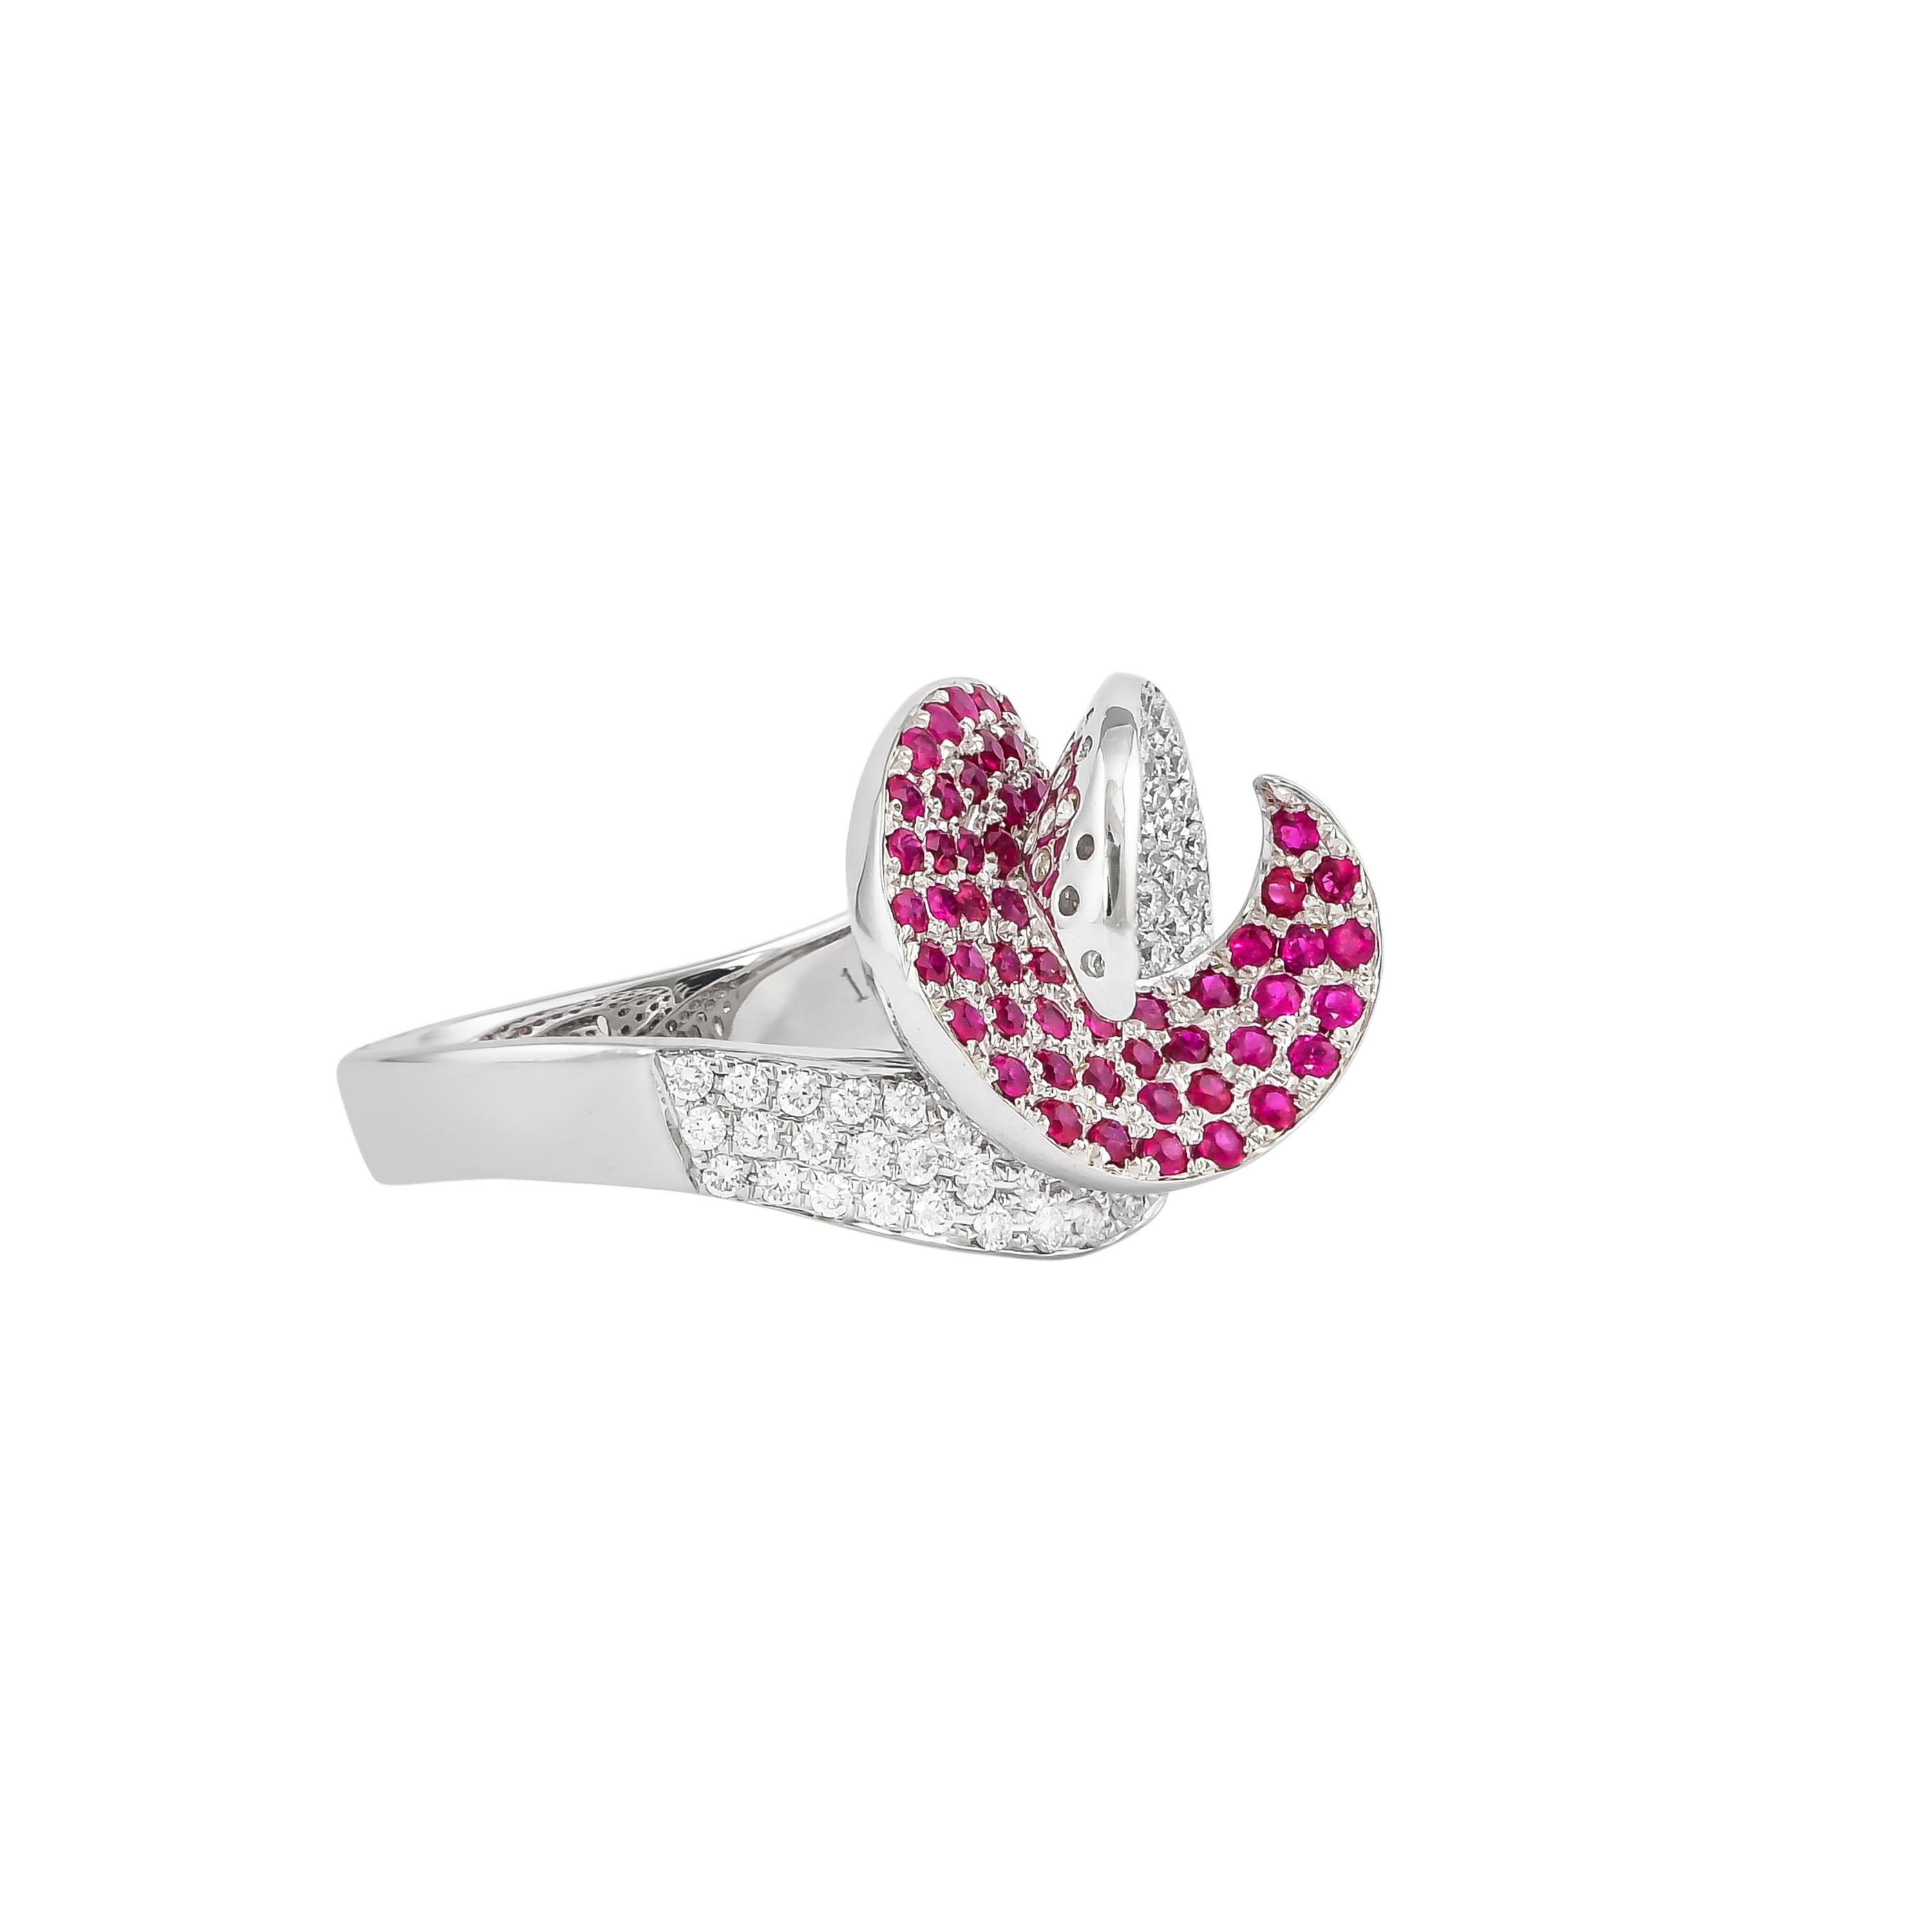 Sunita Nahata presents a collection of fancy cocktail rings with gorgeous gemstones. This ring uses a pave structure of pave set ruby and diamonds woven structurally woven together. This unique and contrasting design presents a striking cocktail